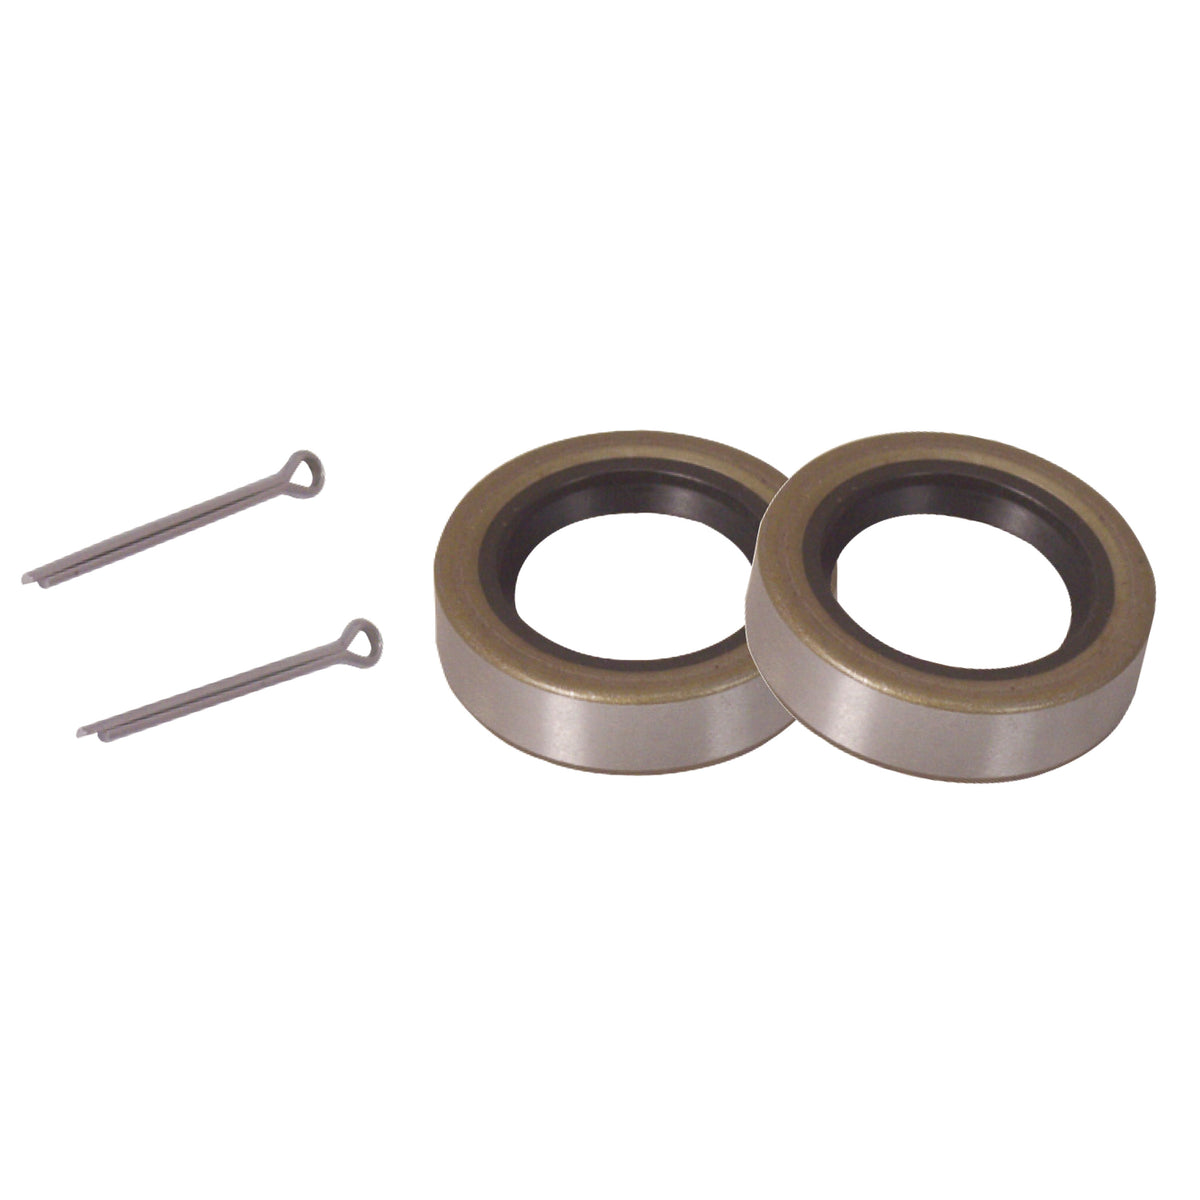 Dutton-Lainson 21882 Bearing Seals and Cotter Keys - 1-3/8 in.